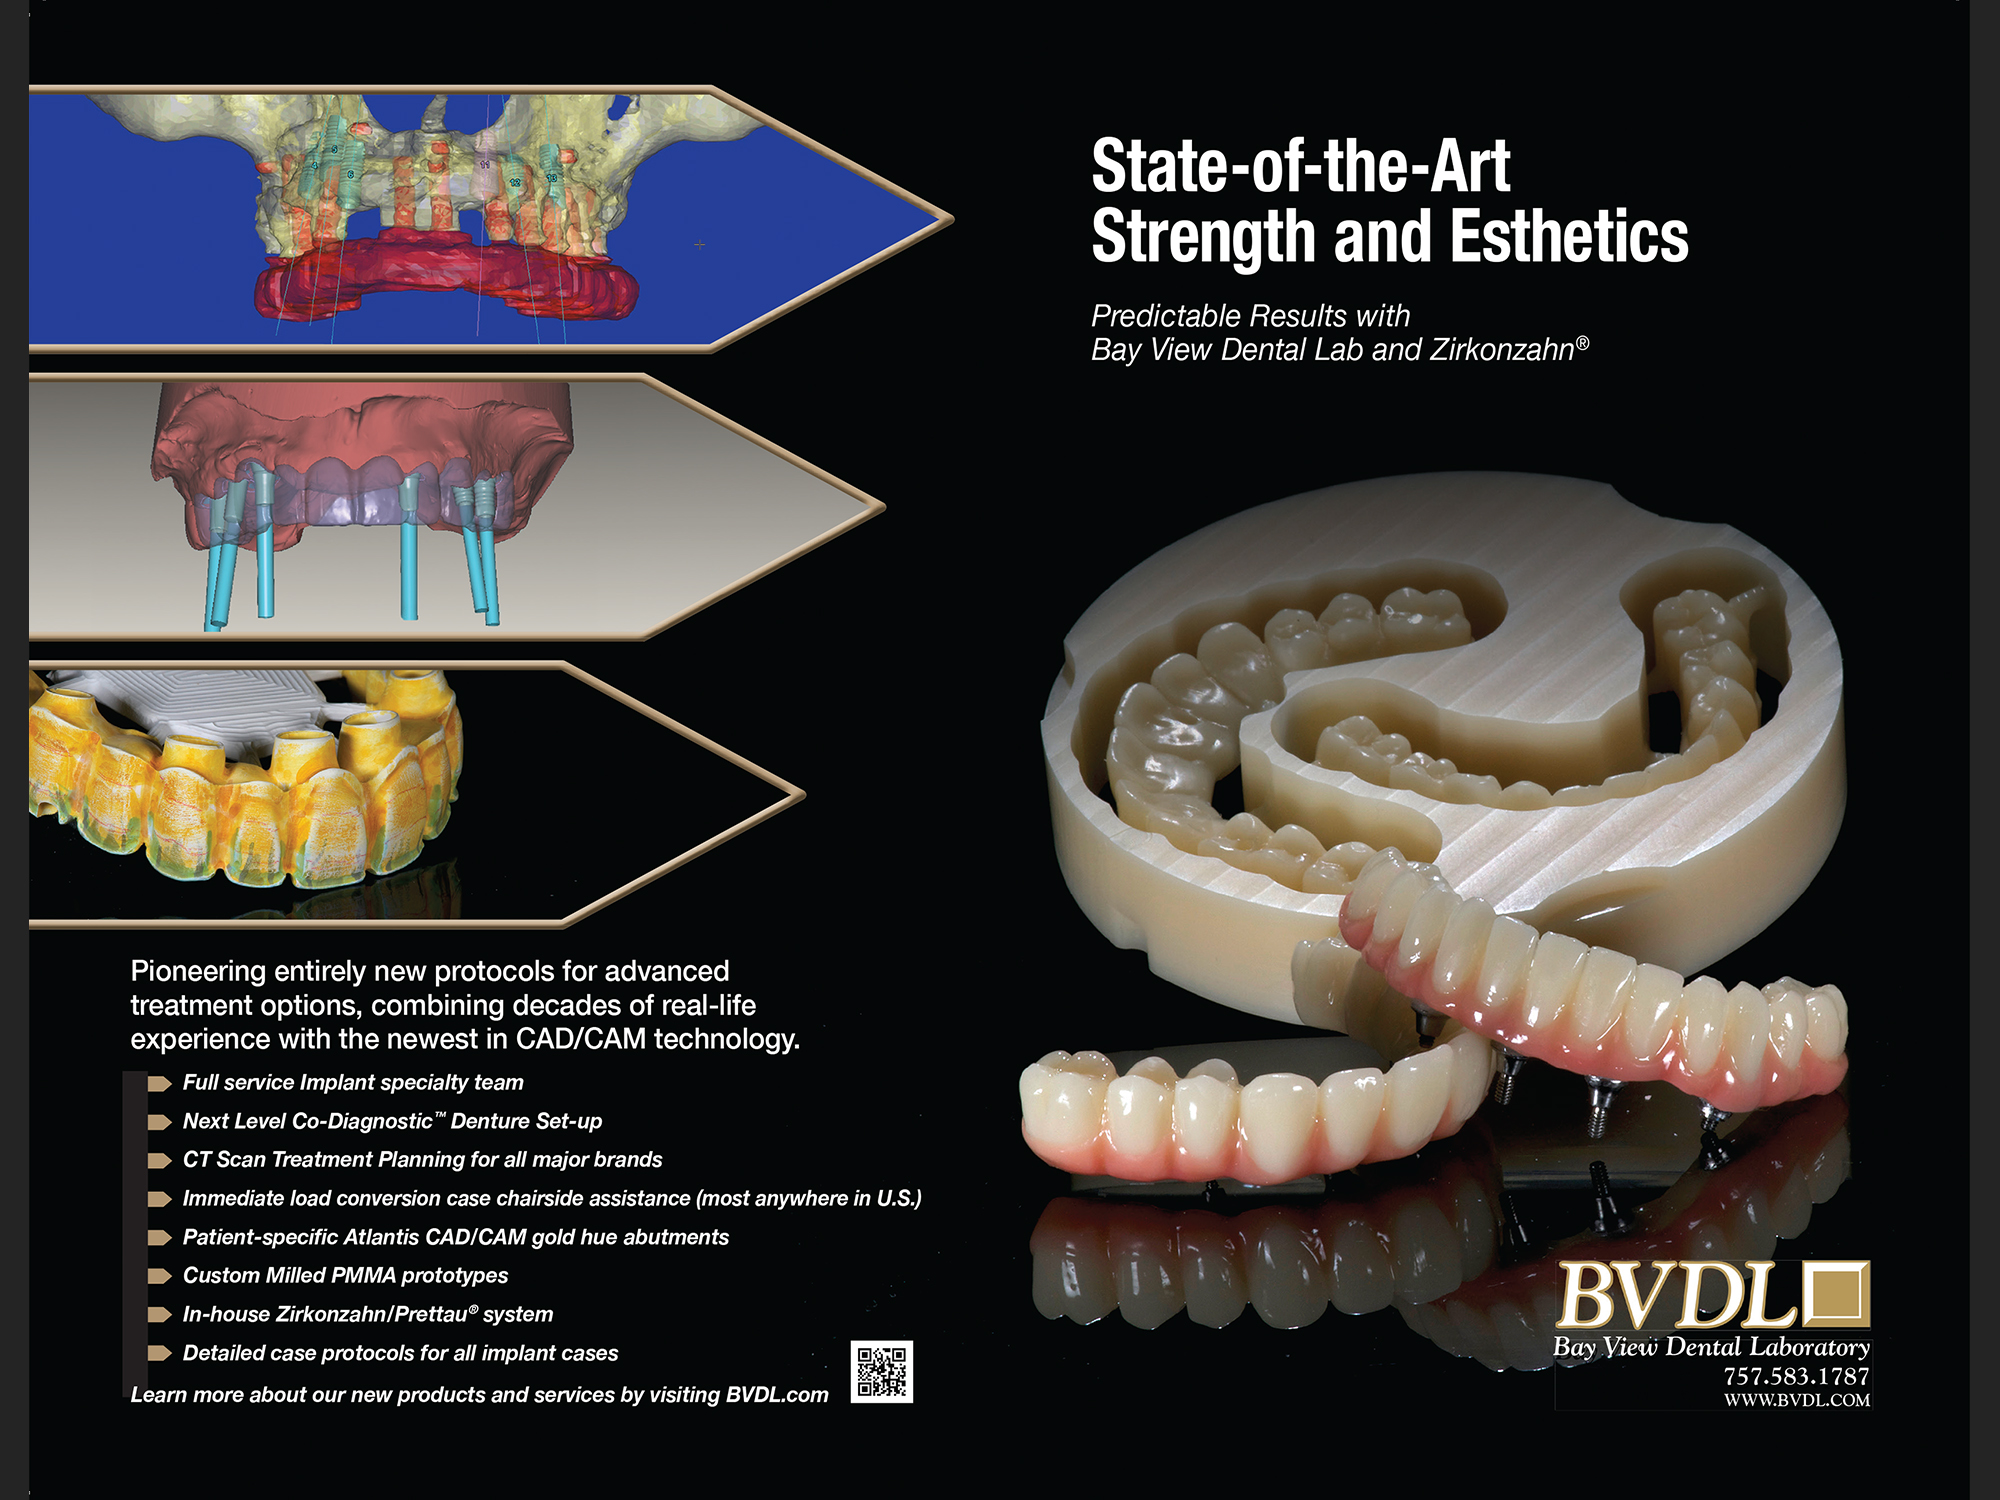 "State-of-the-Art Strength and Esthetics: Bay View Dental Lab", 2014; spread for seminar program.